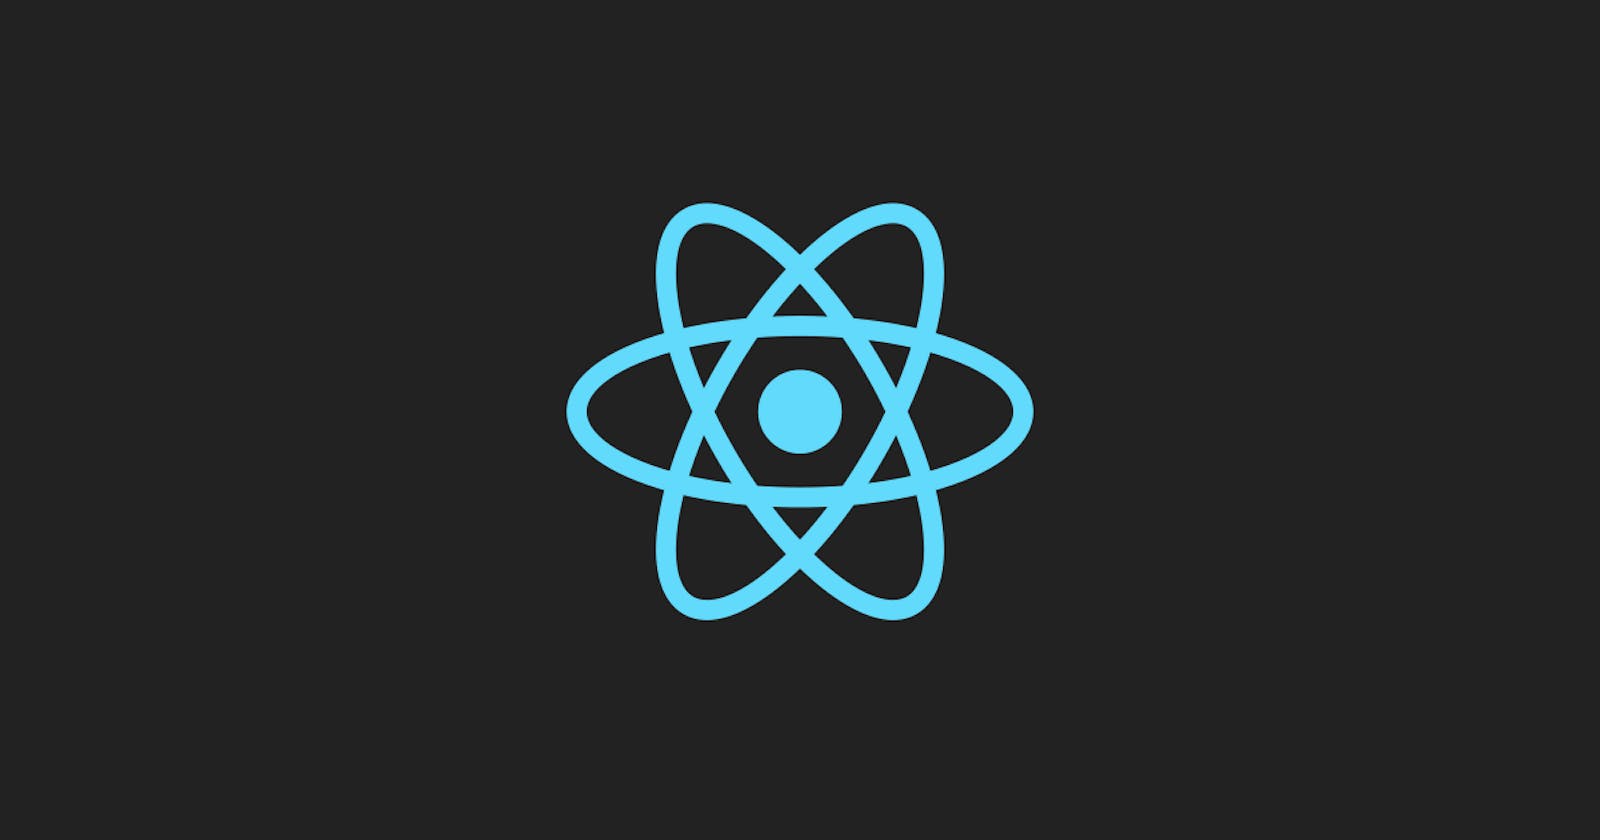 Understanding the React.Children api with common use cases